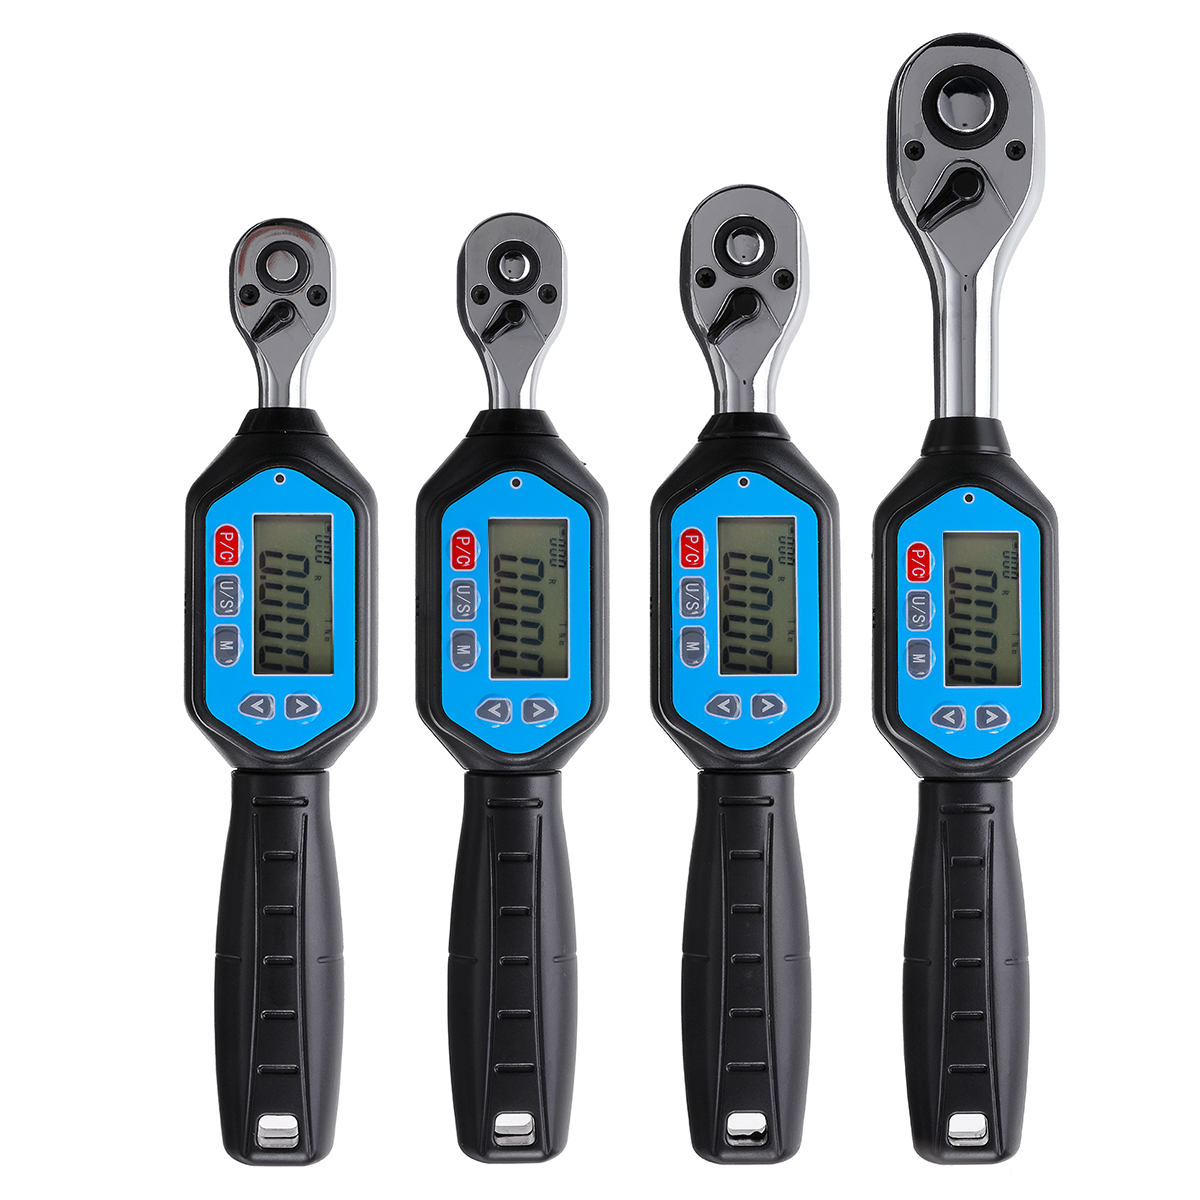 Drillpro-1PCS-Battery-free-Dual-purpose-Adjustable-Wrench-Auto-Repair-Bolt-Torque-Wrench-Mini-Electr-1907326-17